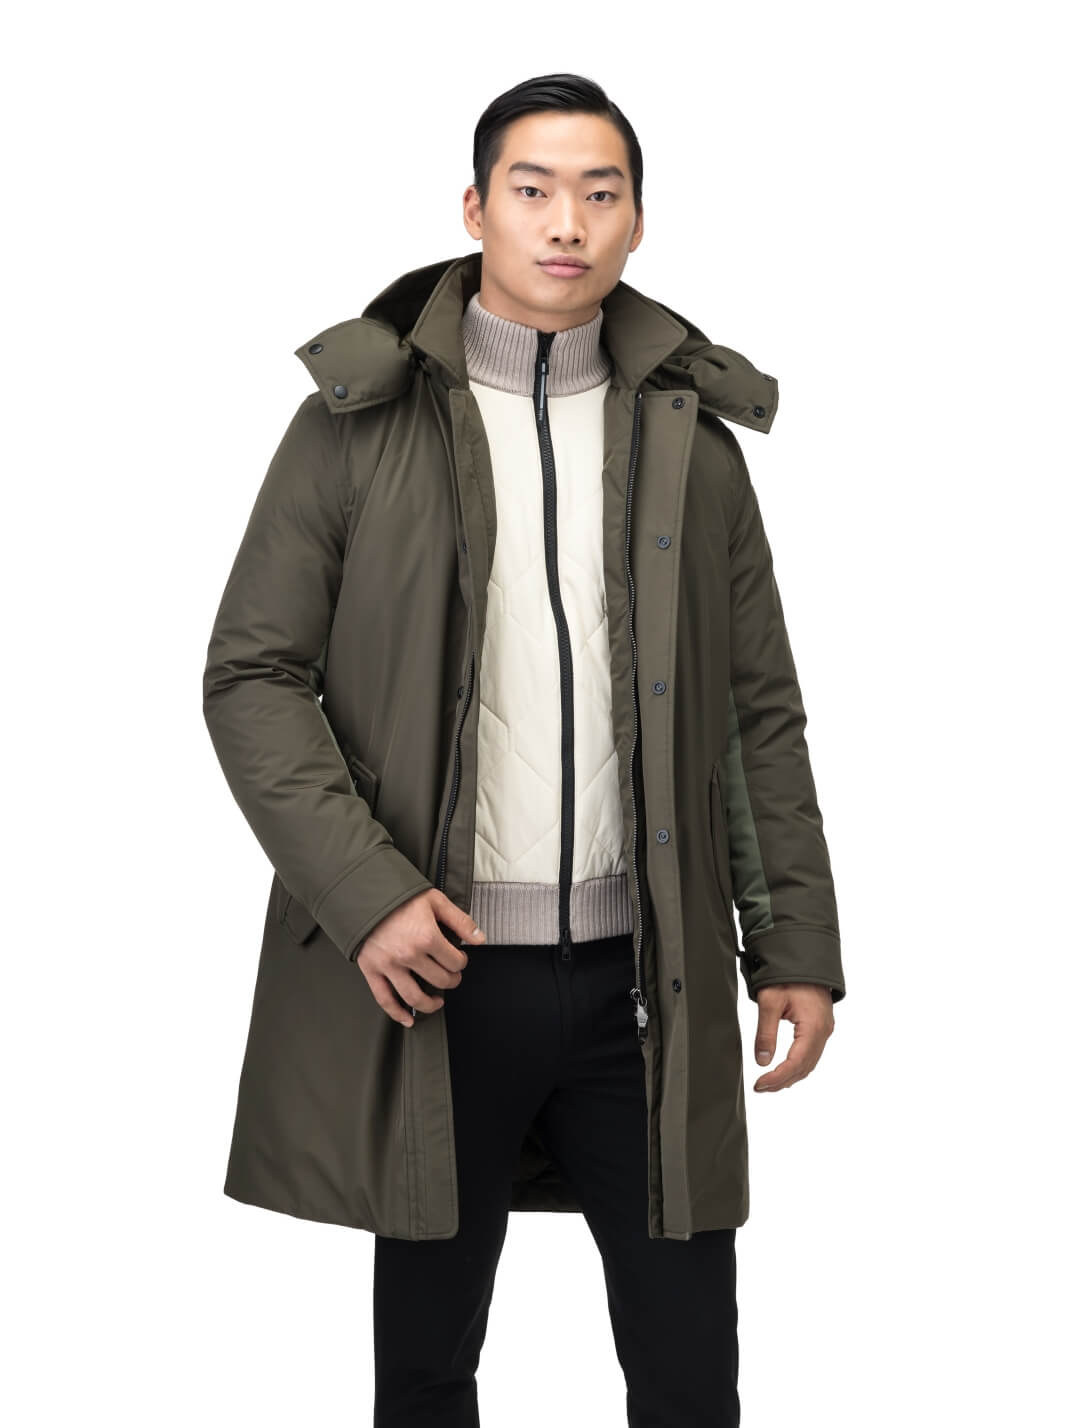 Nord Men's Tailored Trench Coat in knee length, 3-Ply Micro Denier and 4-Way Durable Stretch Weave fabrication, Premium Canadian White Duck Down insulation, removable down-filled hood, exterior zipper pocket at left chest, and adjustable snap button cuffs, in Fatigue/Eden